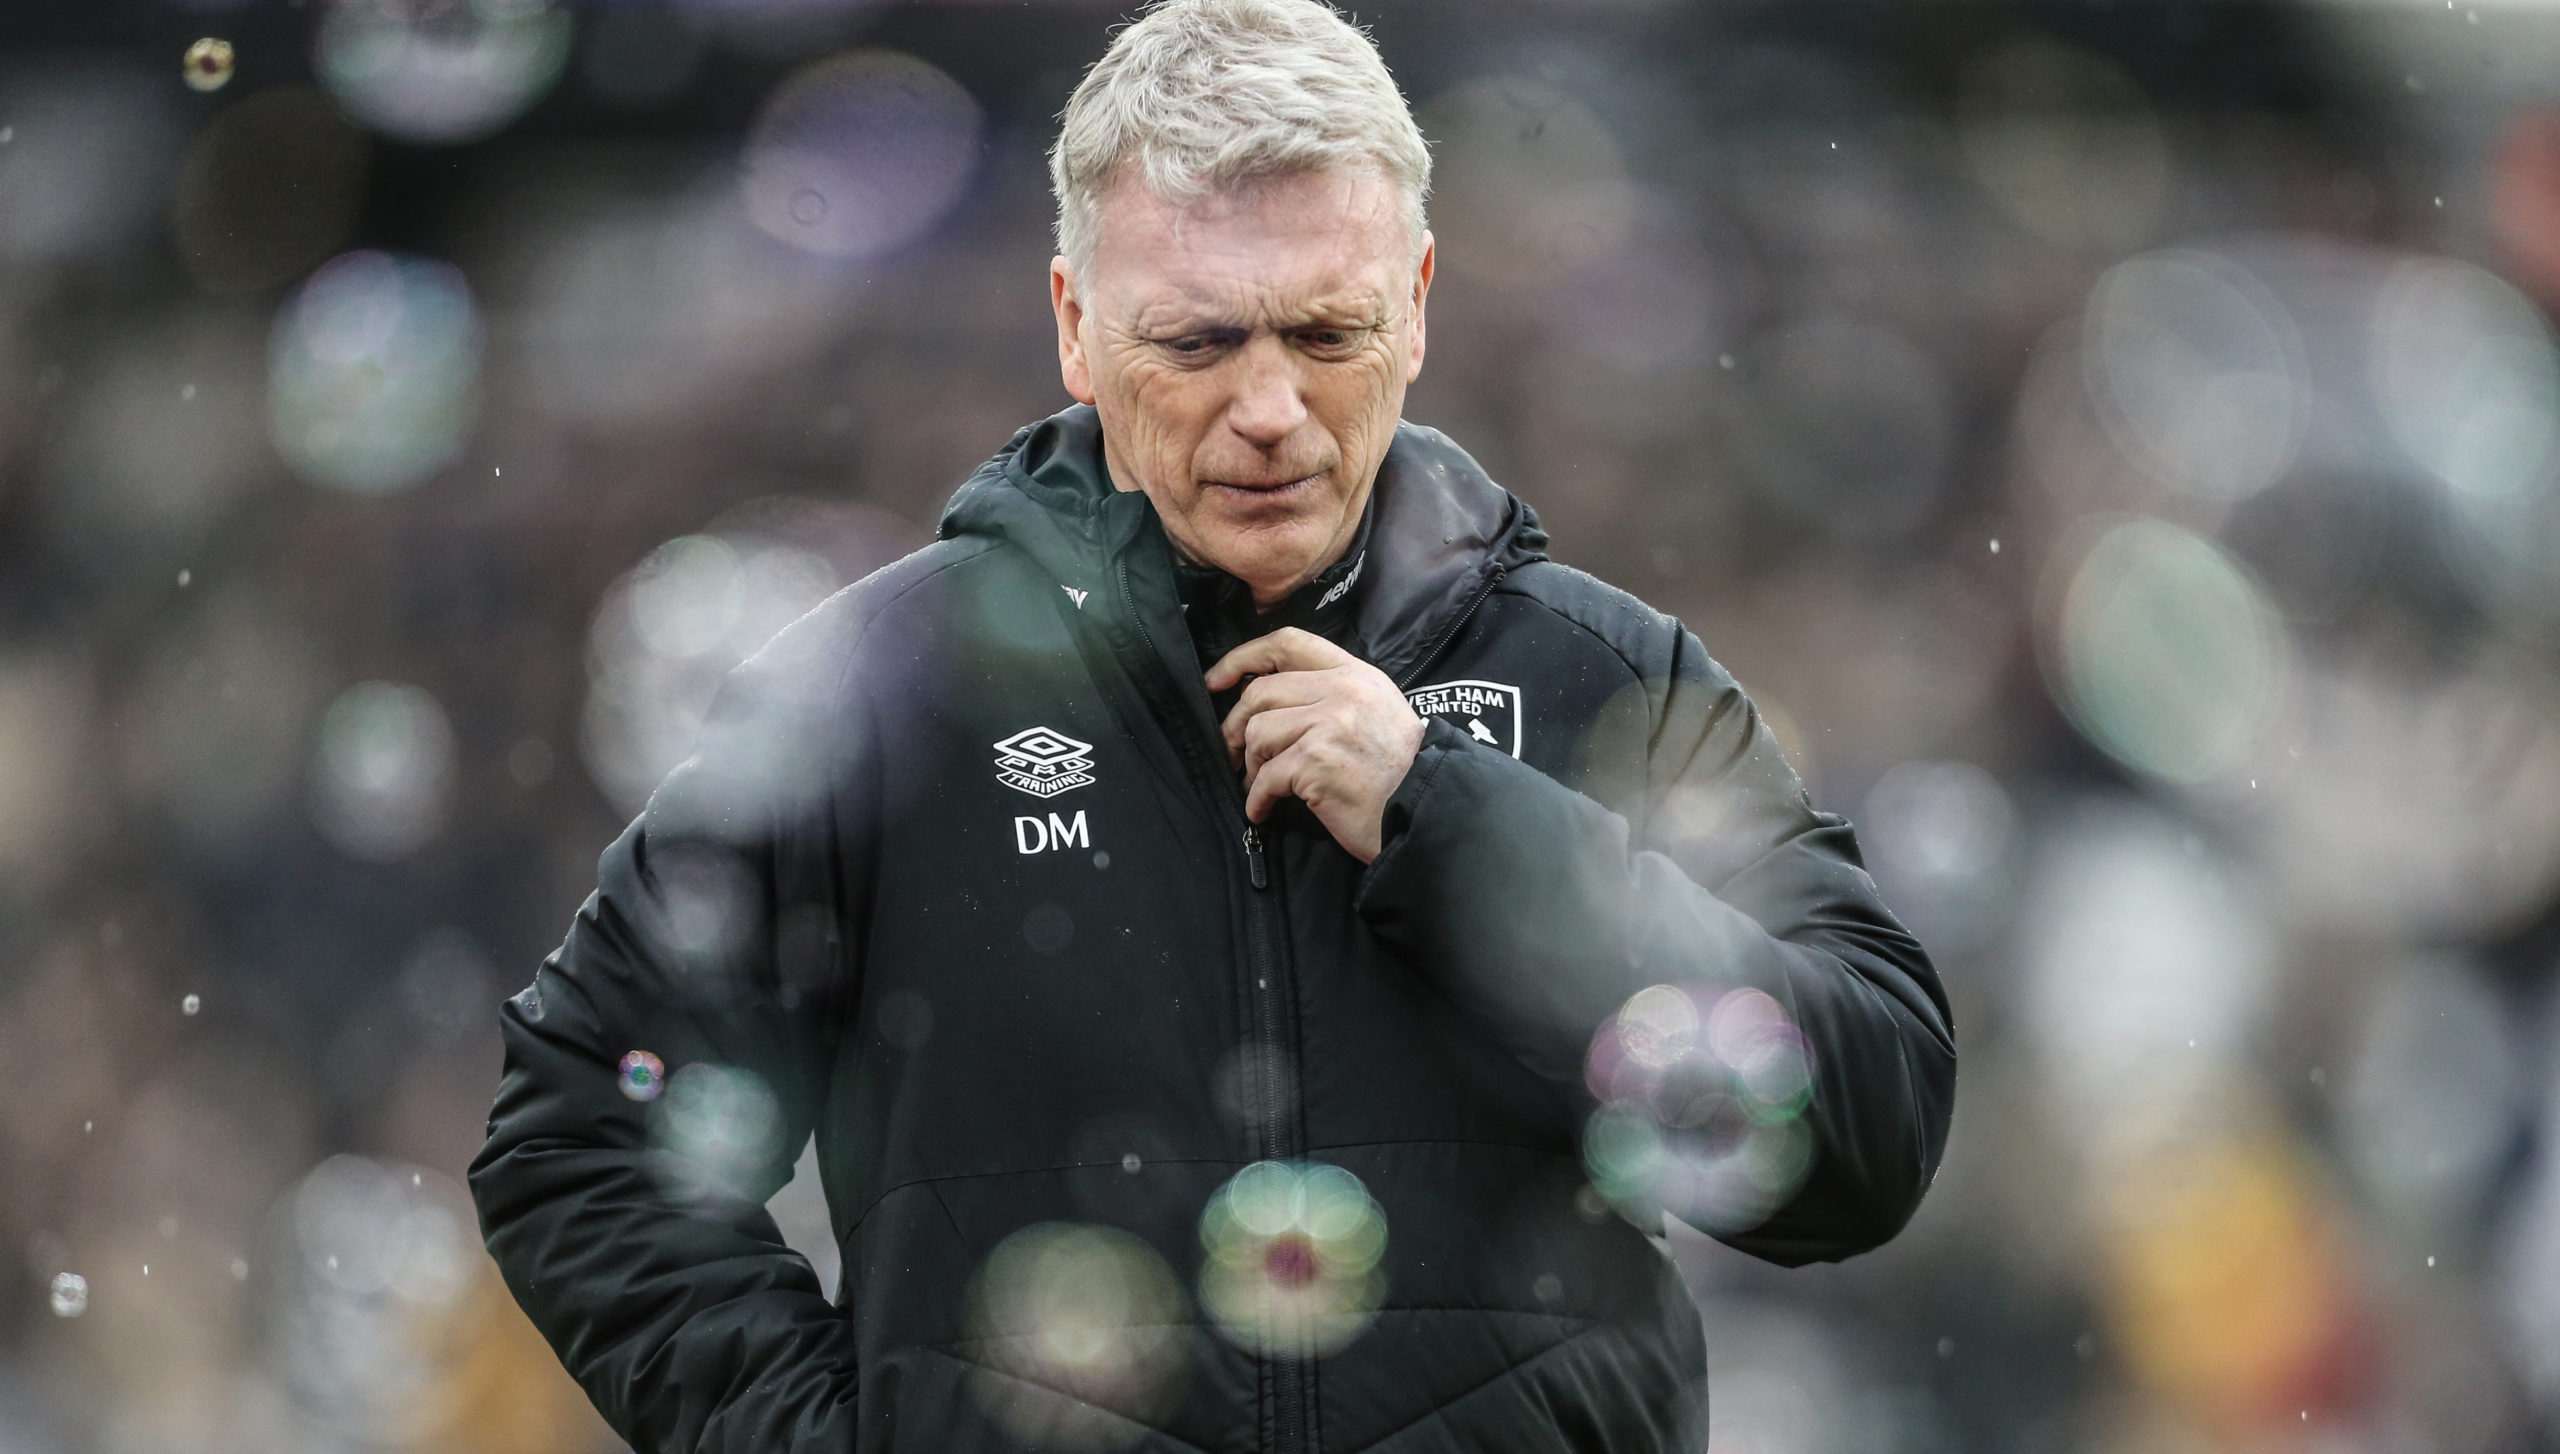 Transfer reporter baffled David Moyes snubbed striker who had dropped West Ham hints